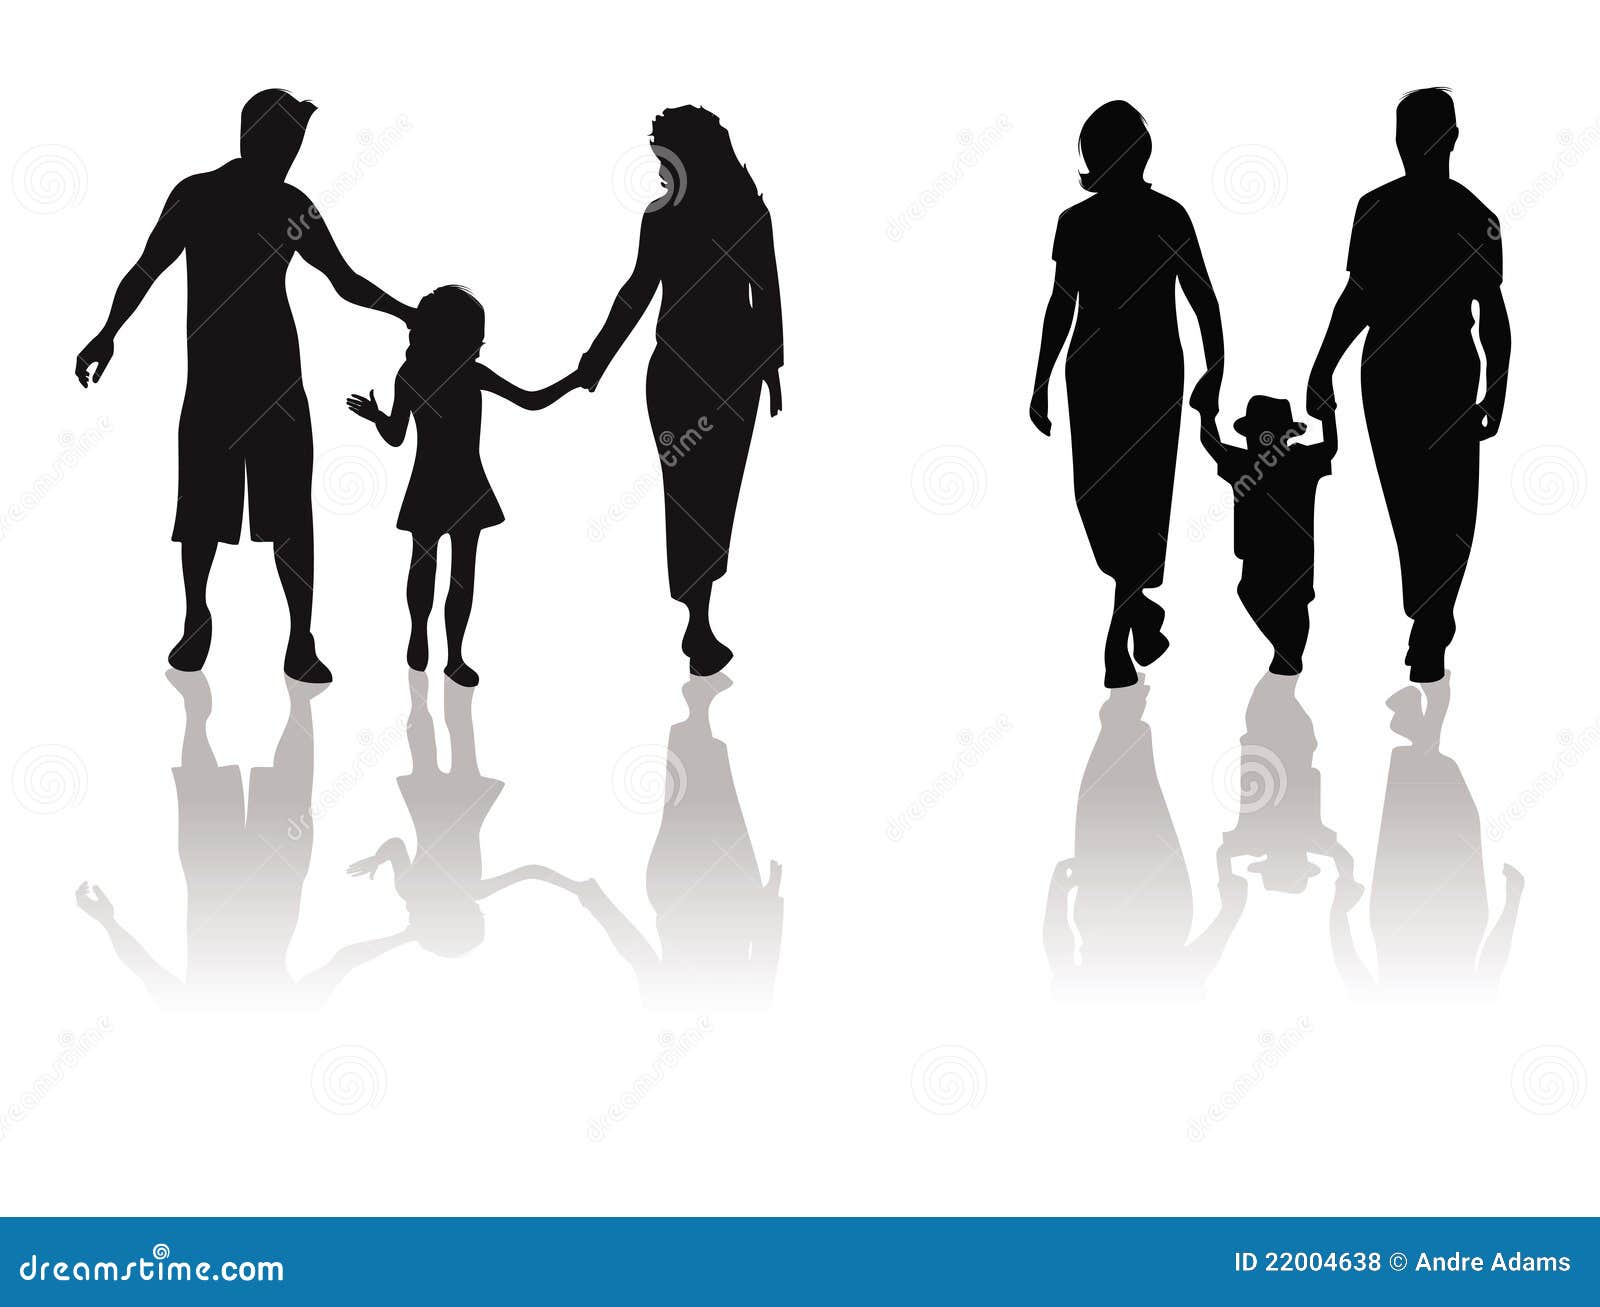 Child Mother Silhouette Stock Illustrations 25 986 Child Mother Silhouette Stock Illustrations Vectors Clipart Dreamstime